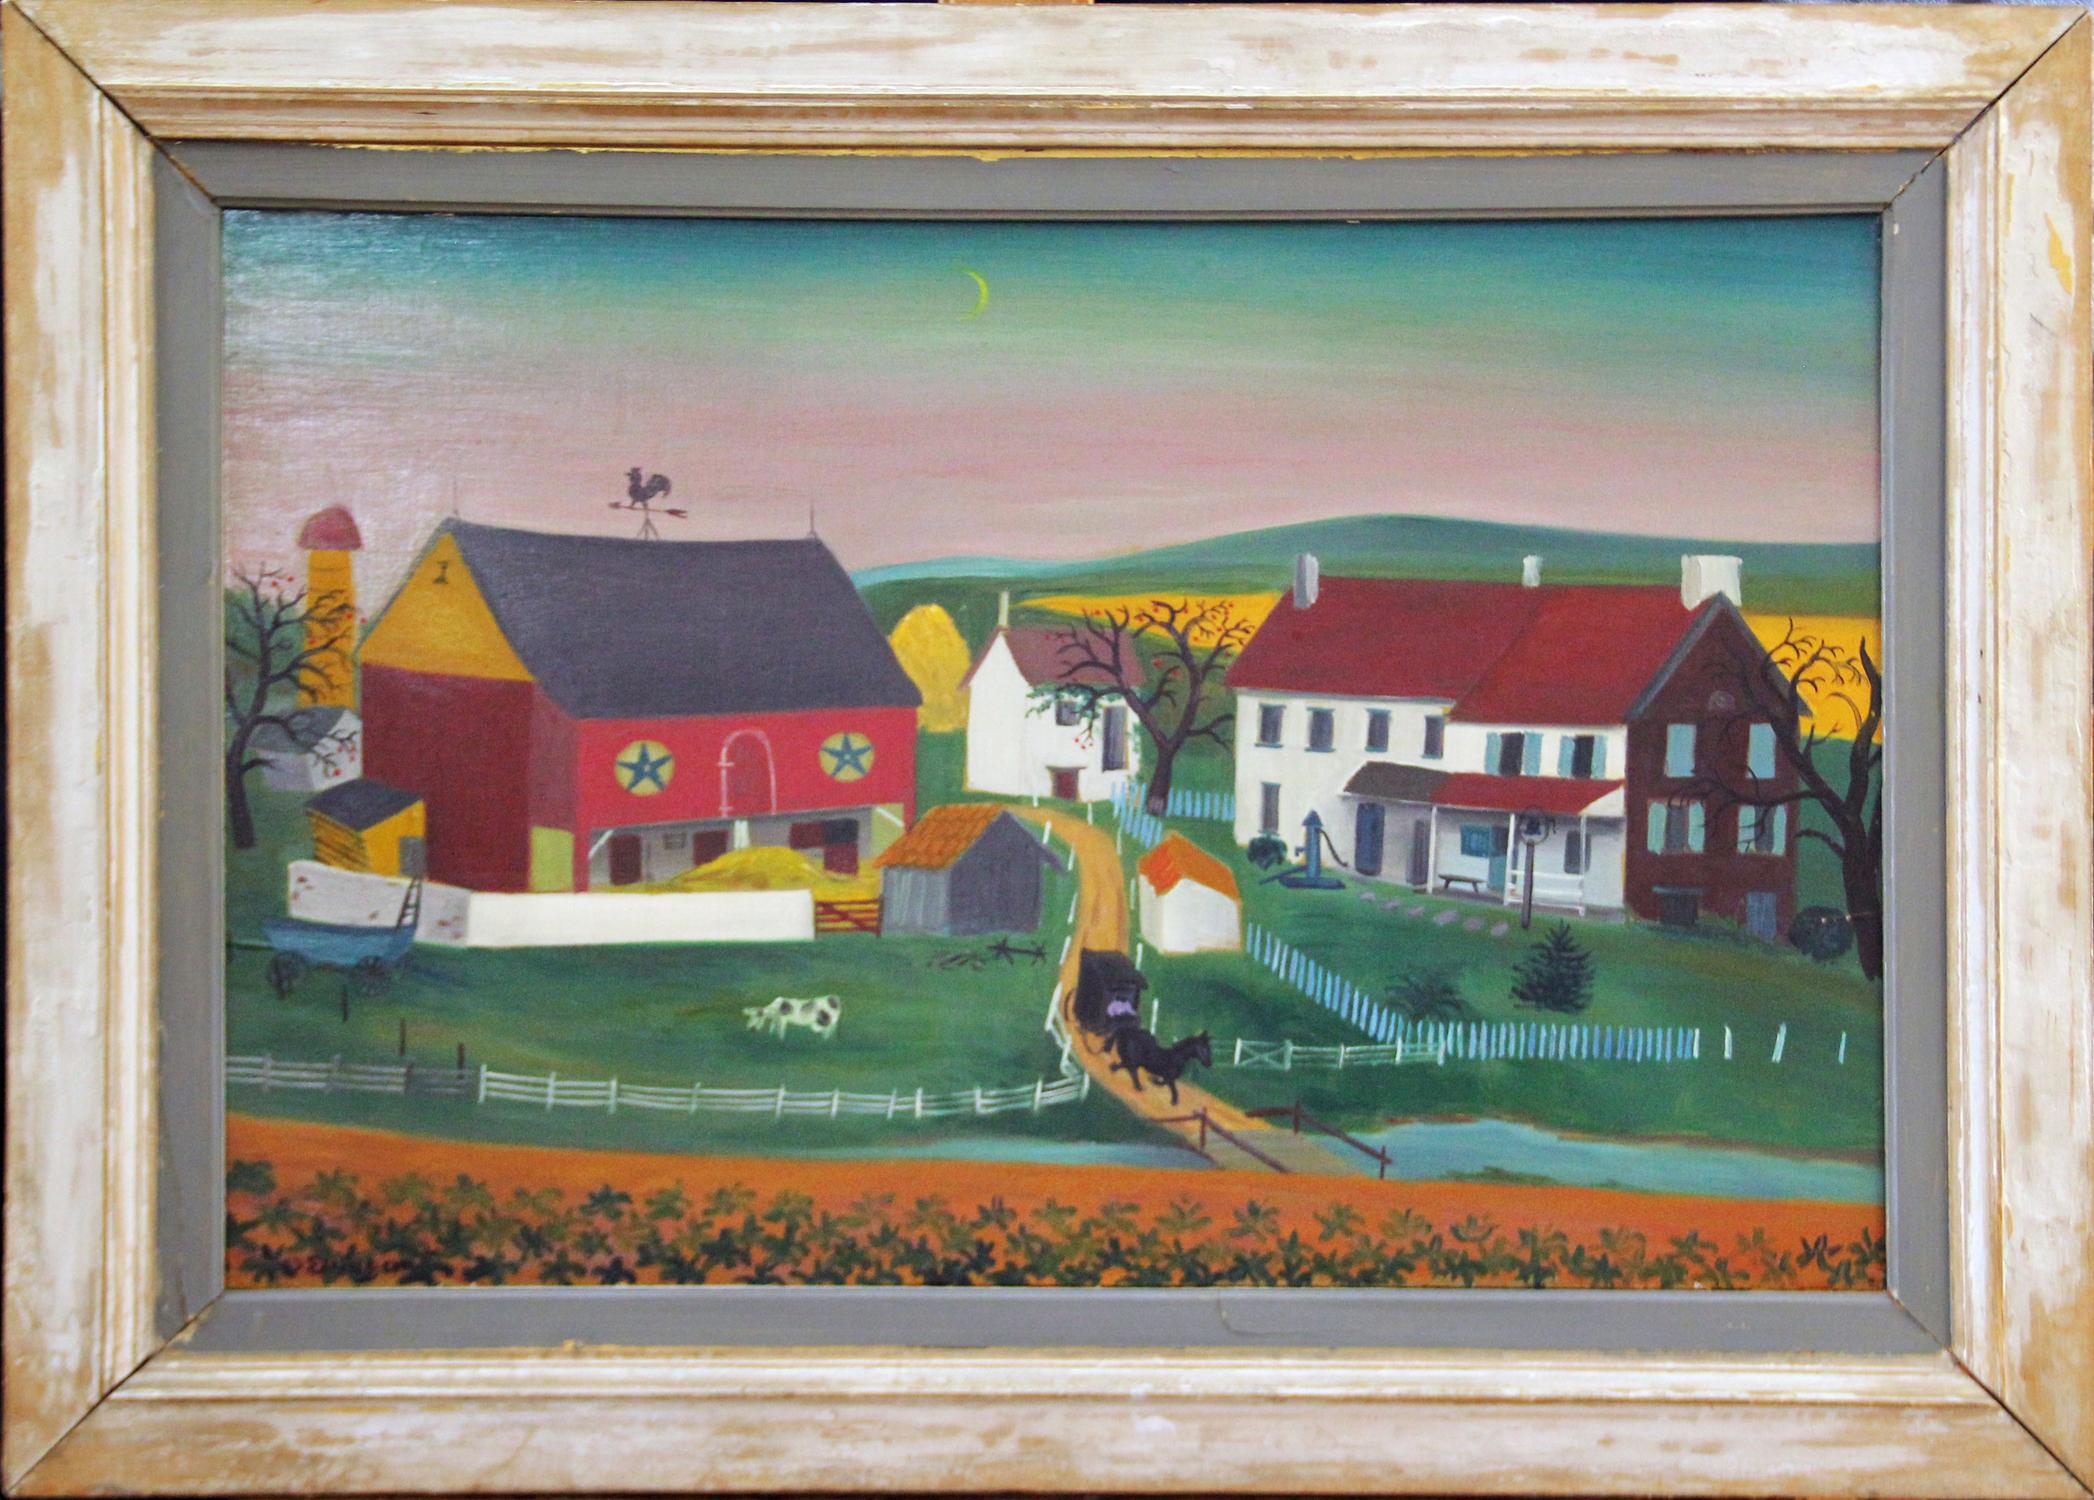 "Blue Hills" is an oil on panel painting by Pennsylvania Dutch folk artist and antique dealer, David Ellinger (American, 1913 - 2003).
The 20" x 30" painting of a farm scene with a red barn and a horse-drawn Amish carriage to the center is signed "D